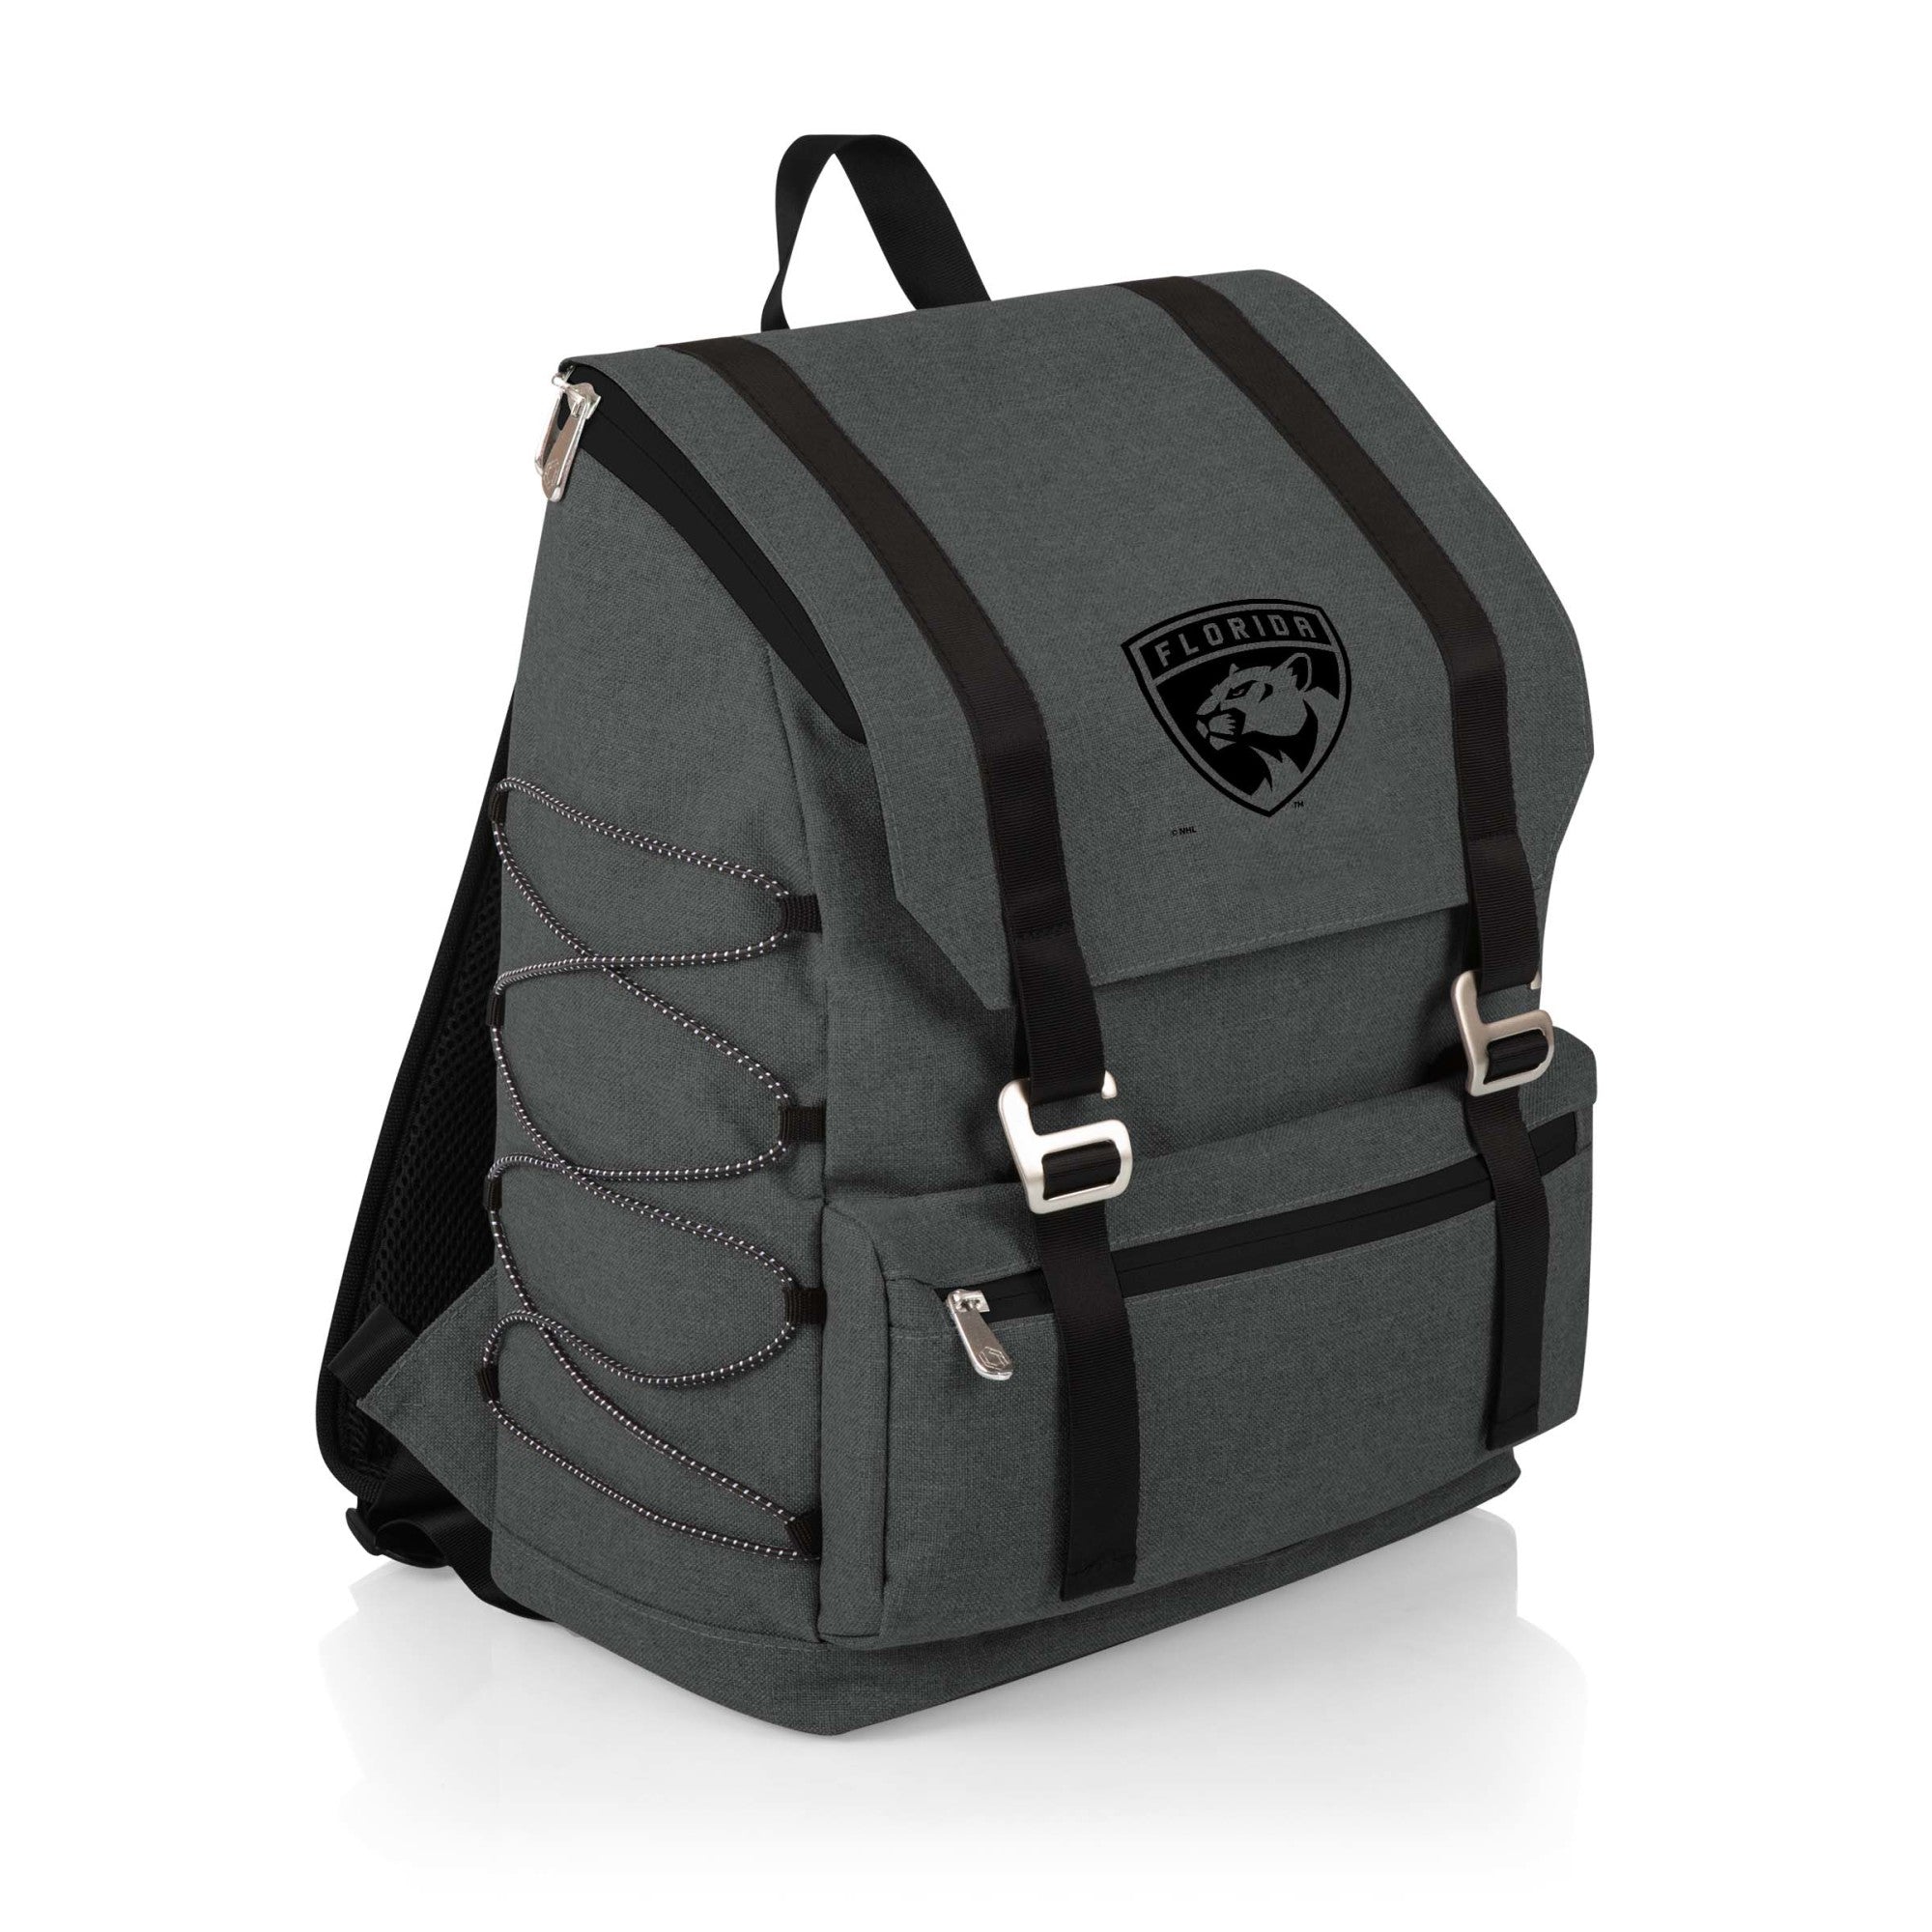 Florida Panthers - On The Go Traverse Backpack Cooler